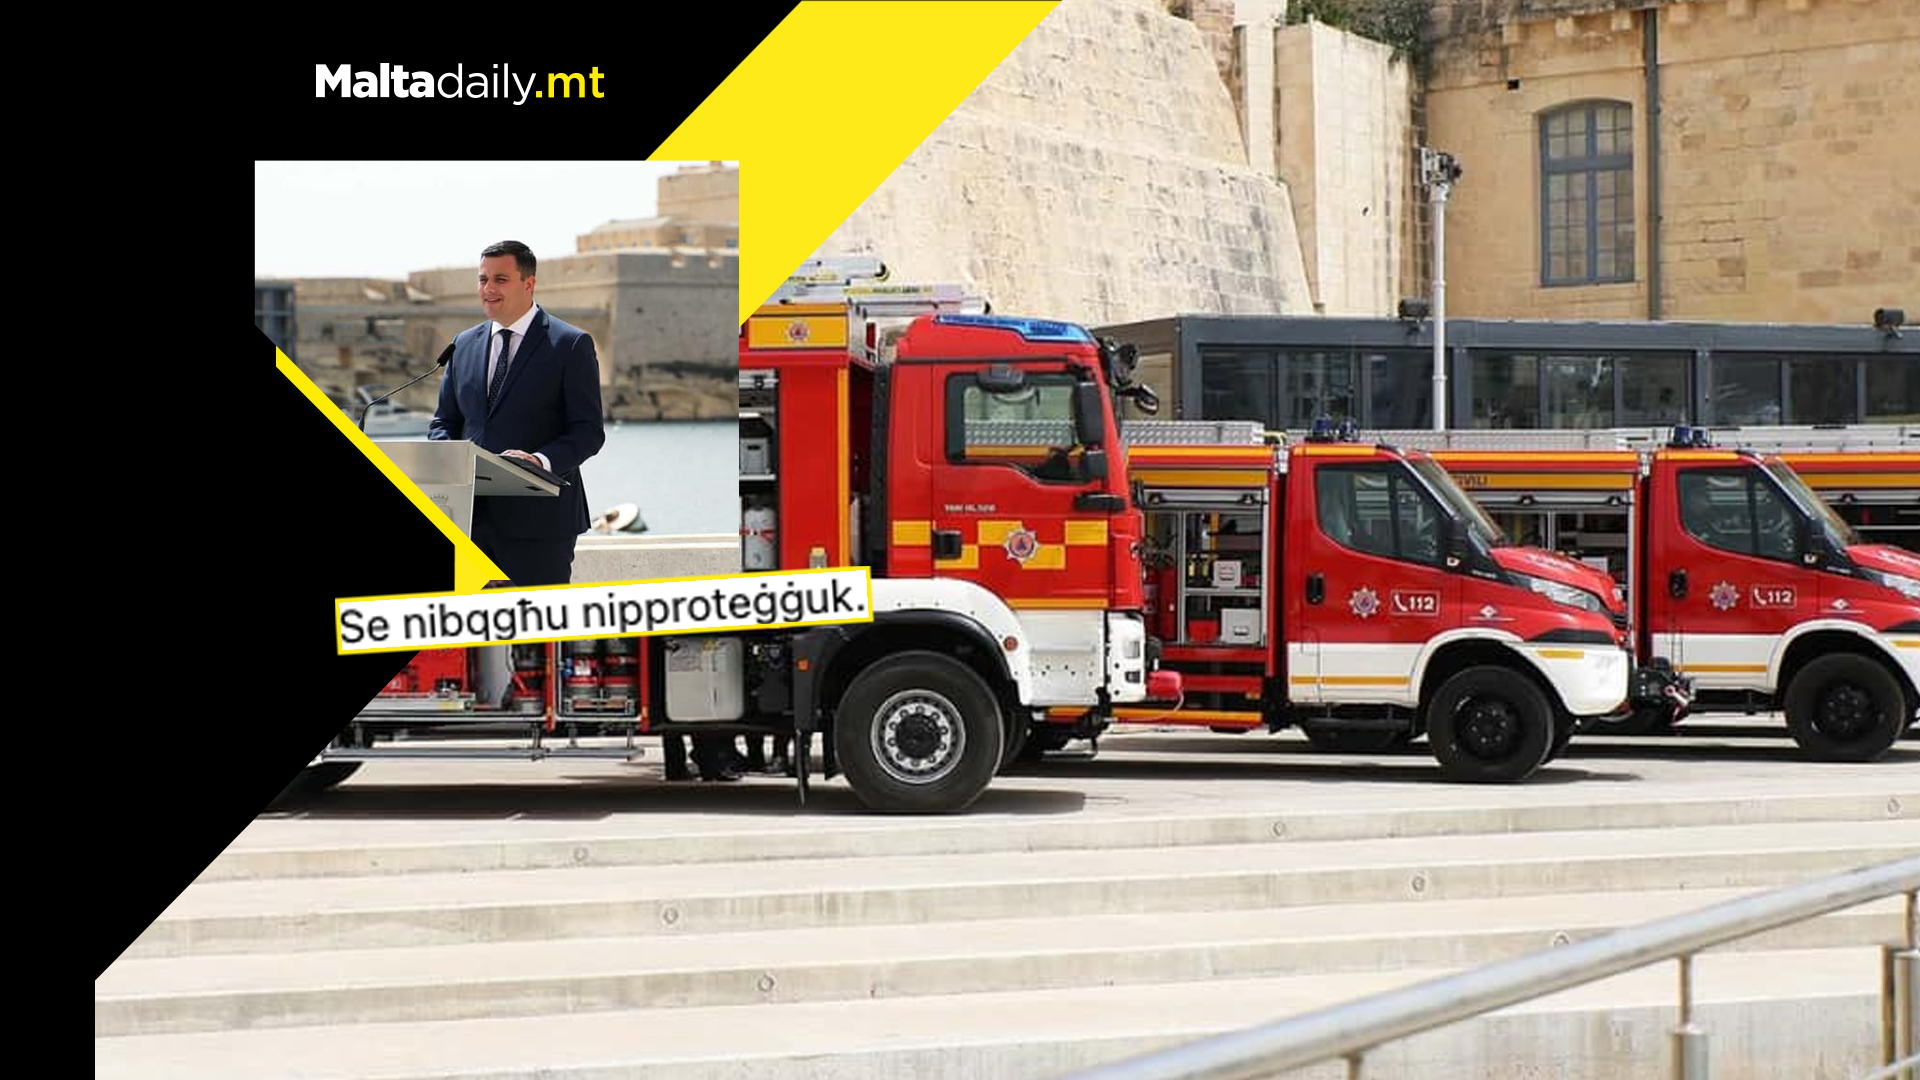 Four brand new civil protection vehicles inaugurated